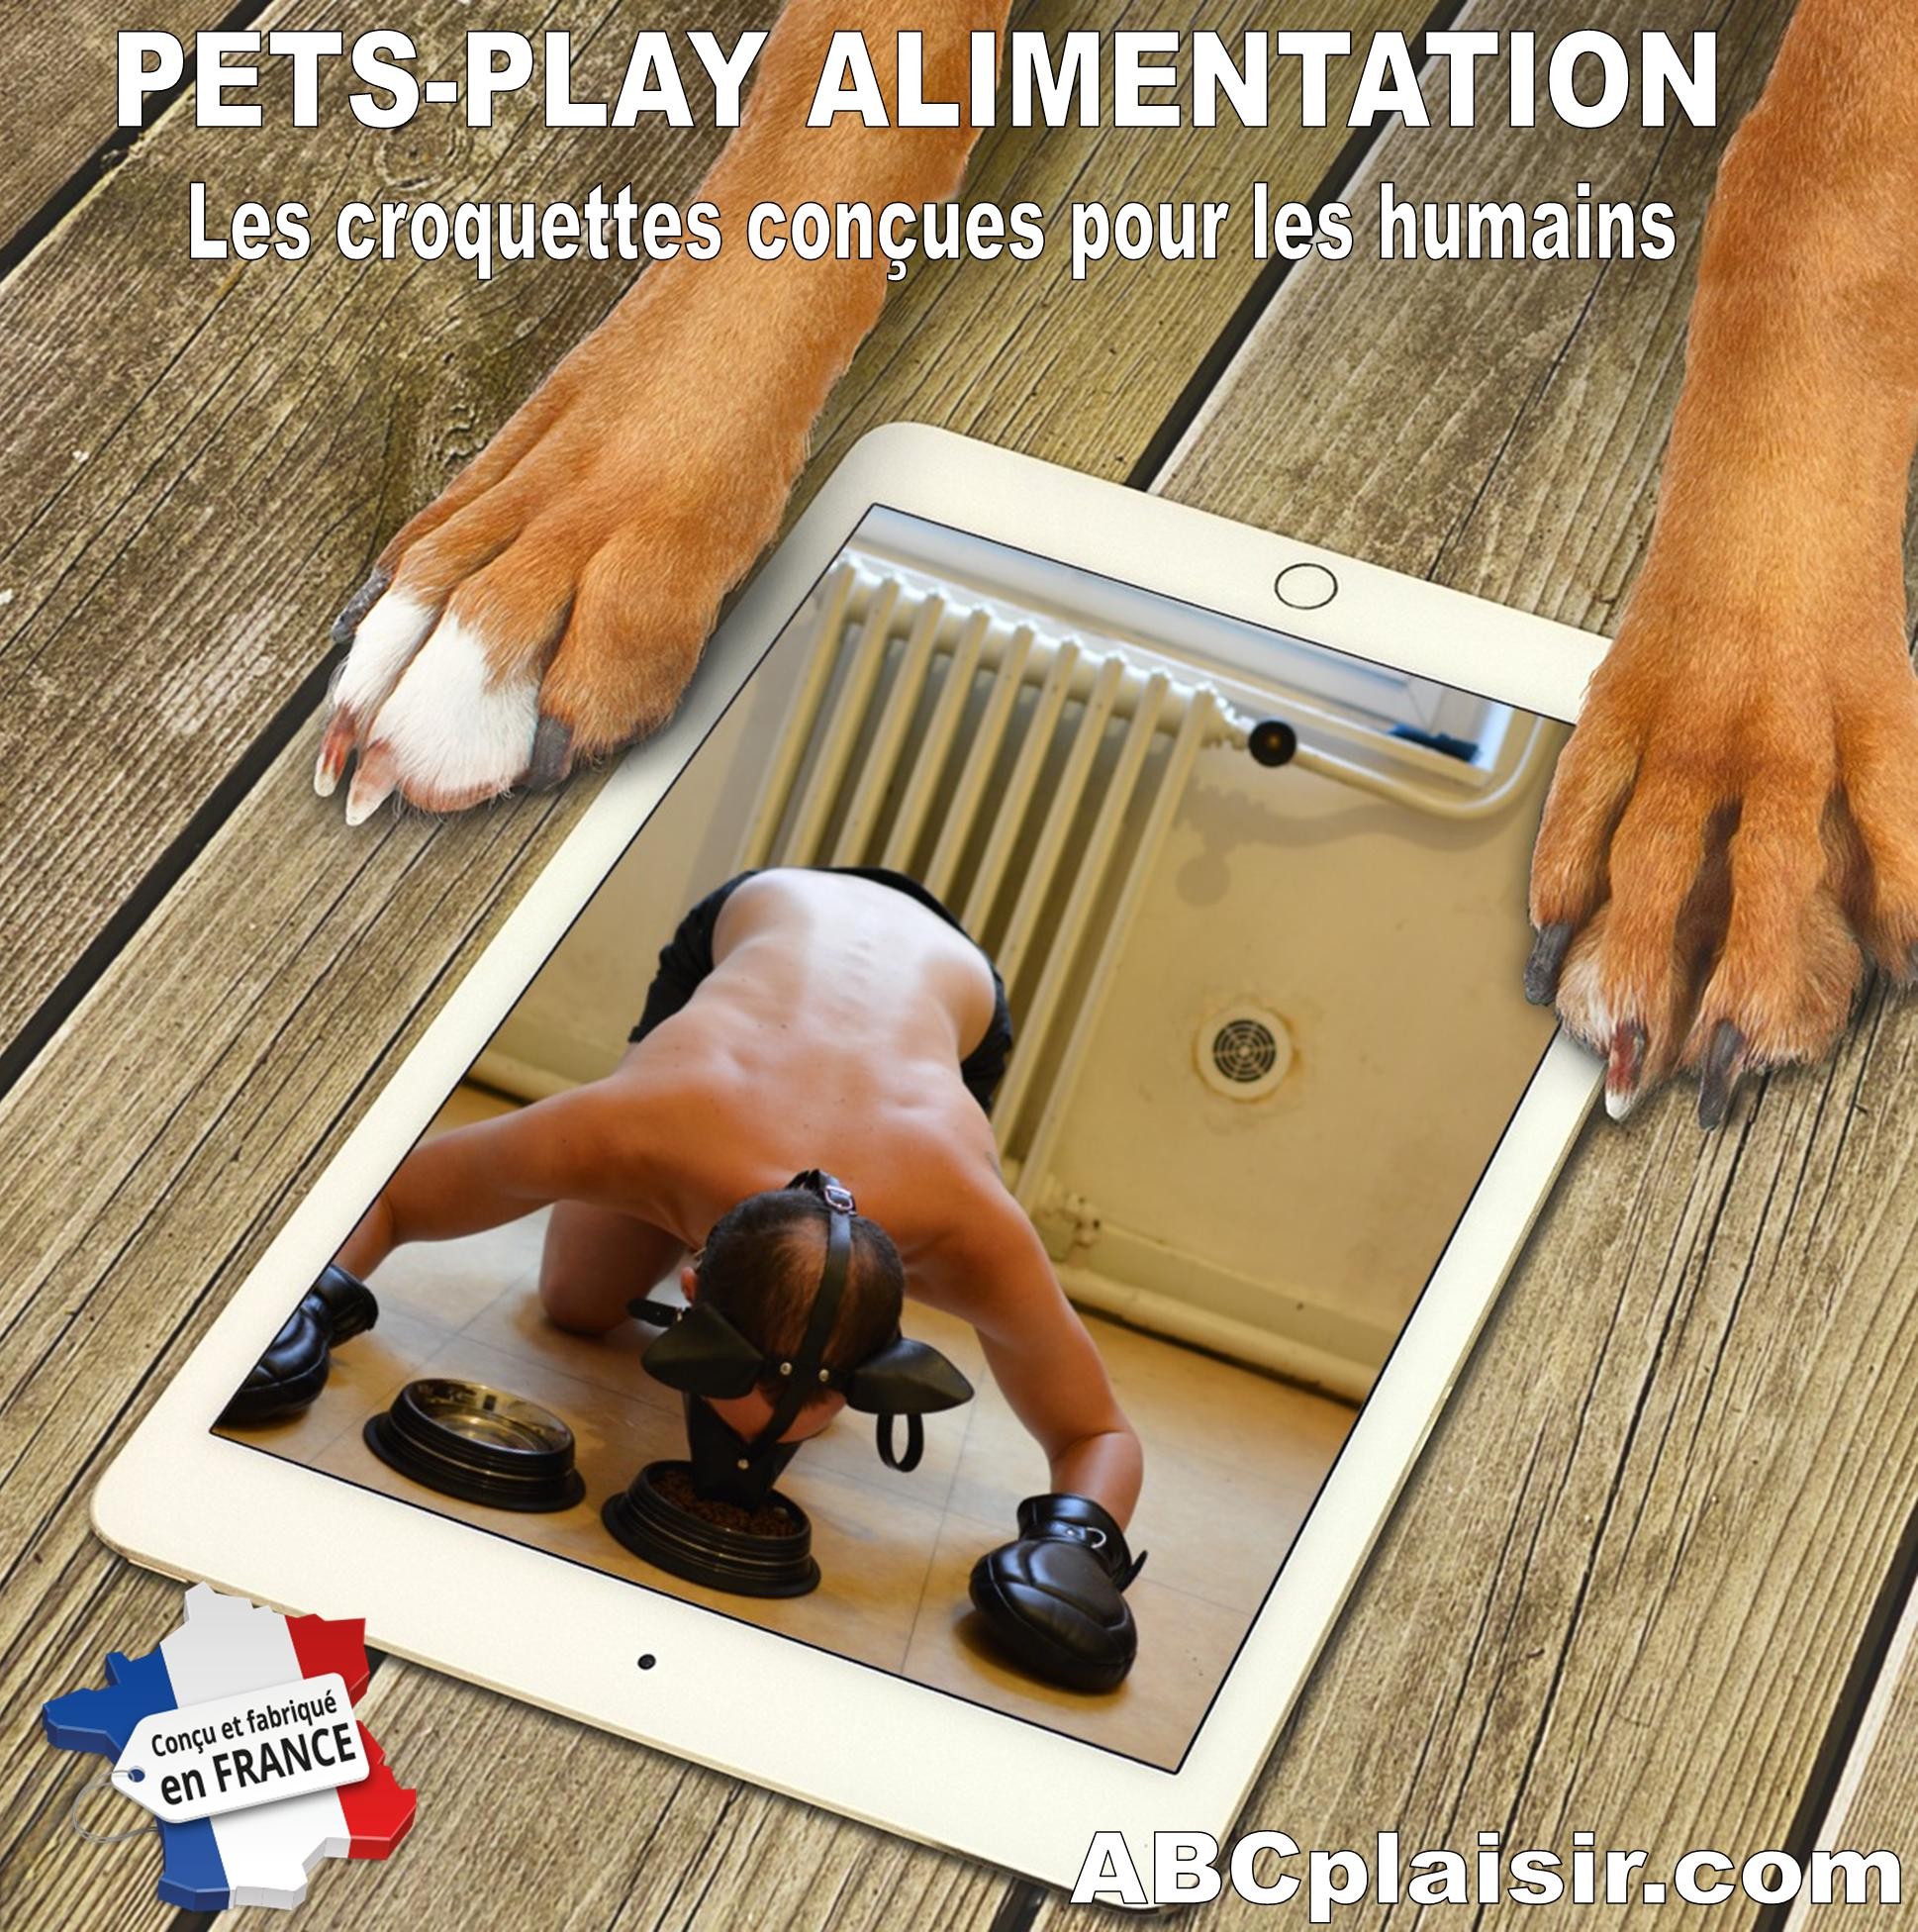 Puppy-play pets-play alimentation